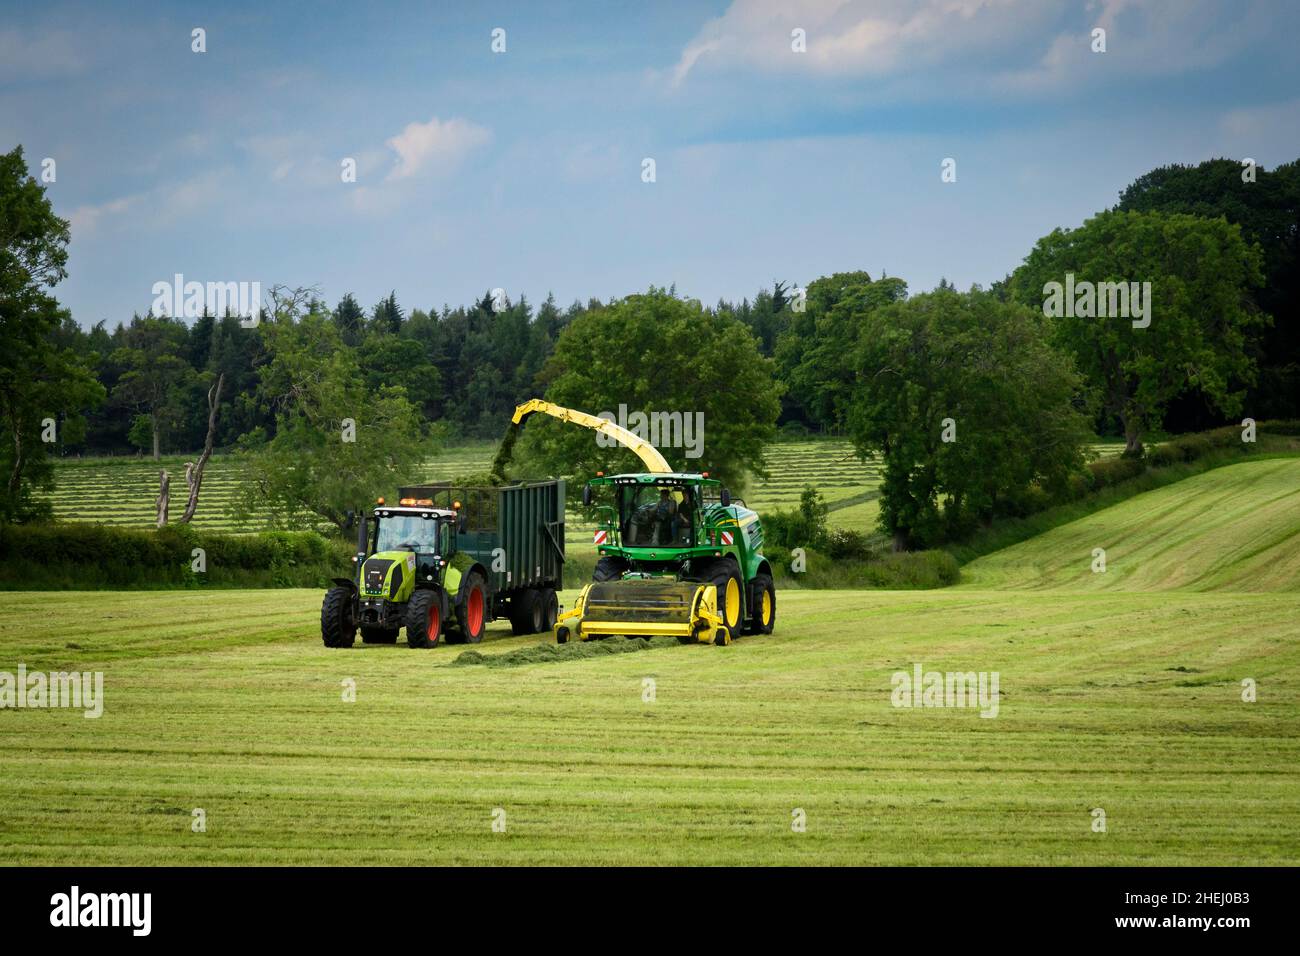 1 Claas tractor haymaking, working in farm field, driving with John Deere forage harvester filling trailer (cut grass silage) - Yorkshire, England UK. Stock Photo